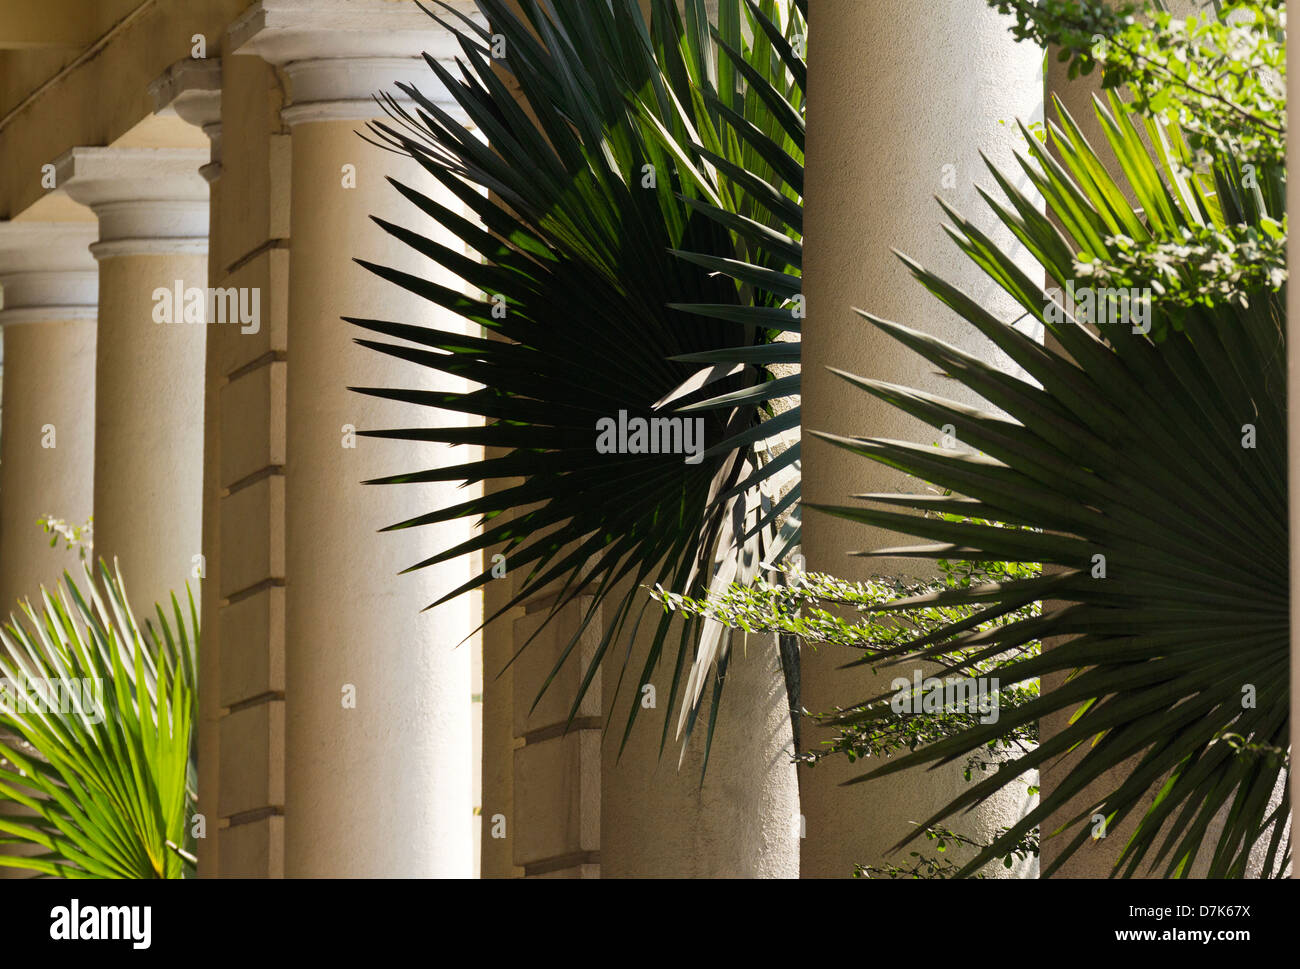 Plants and pillars - the old Colononial Post Office in Yangon, Myanmar Stock Photo